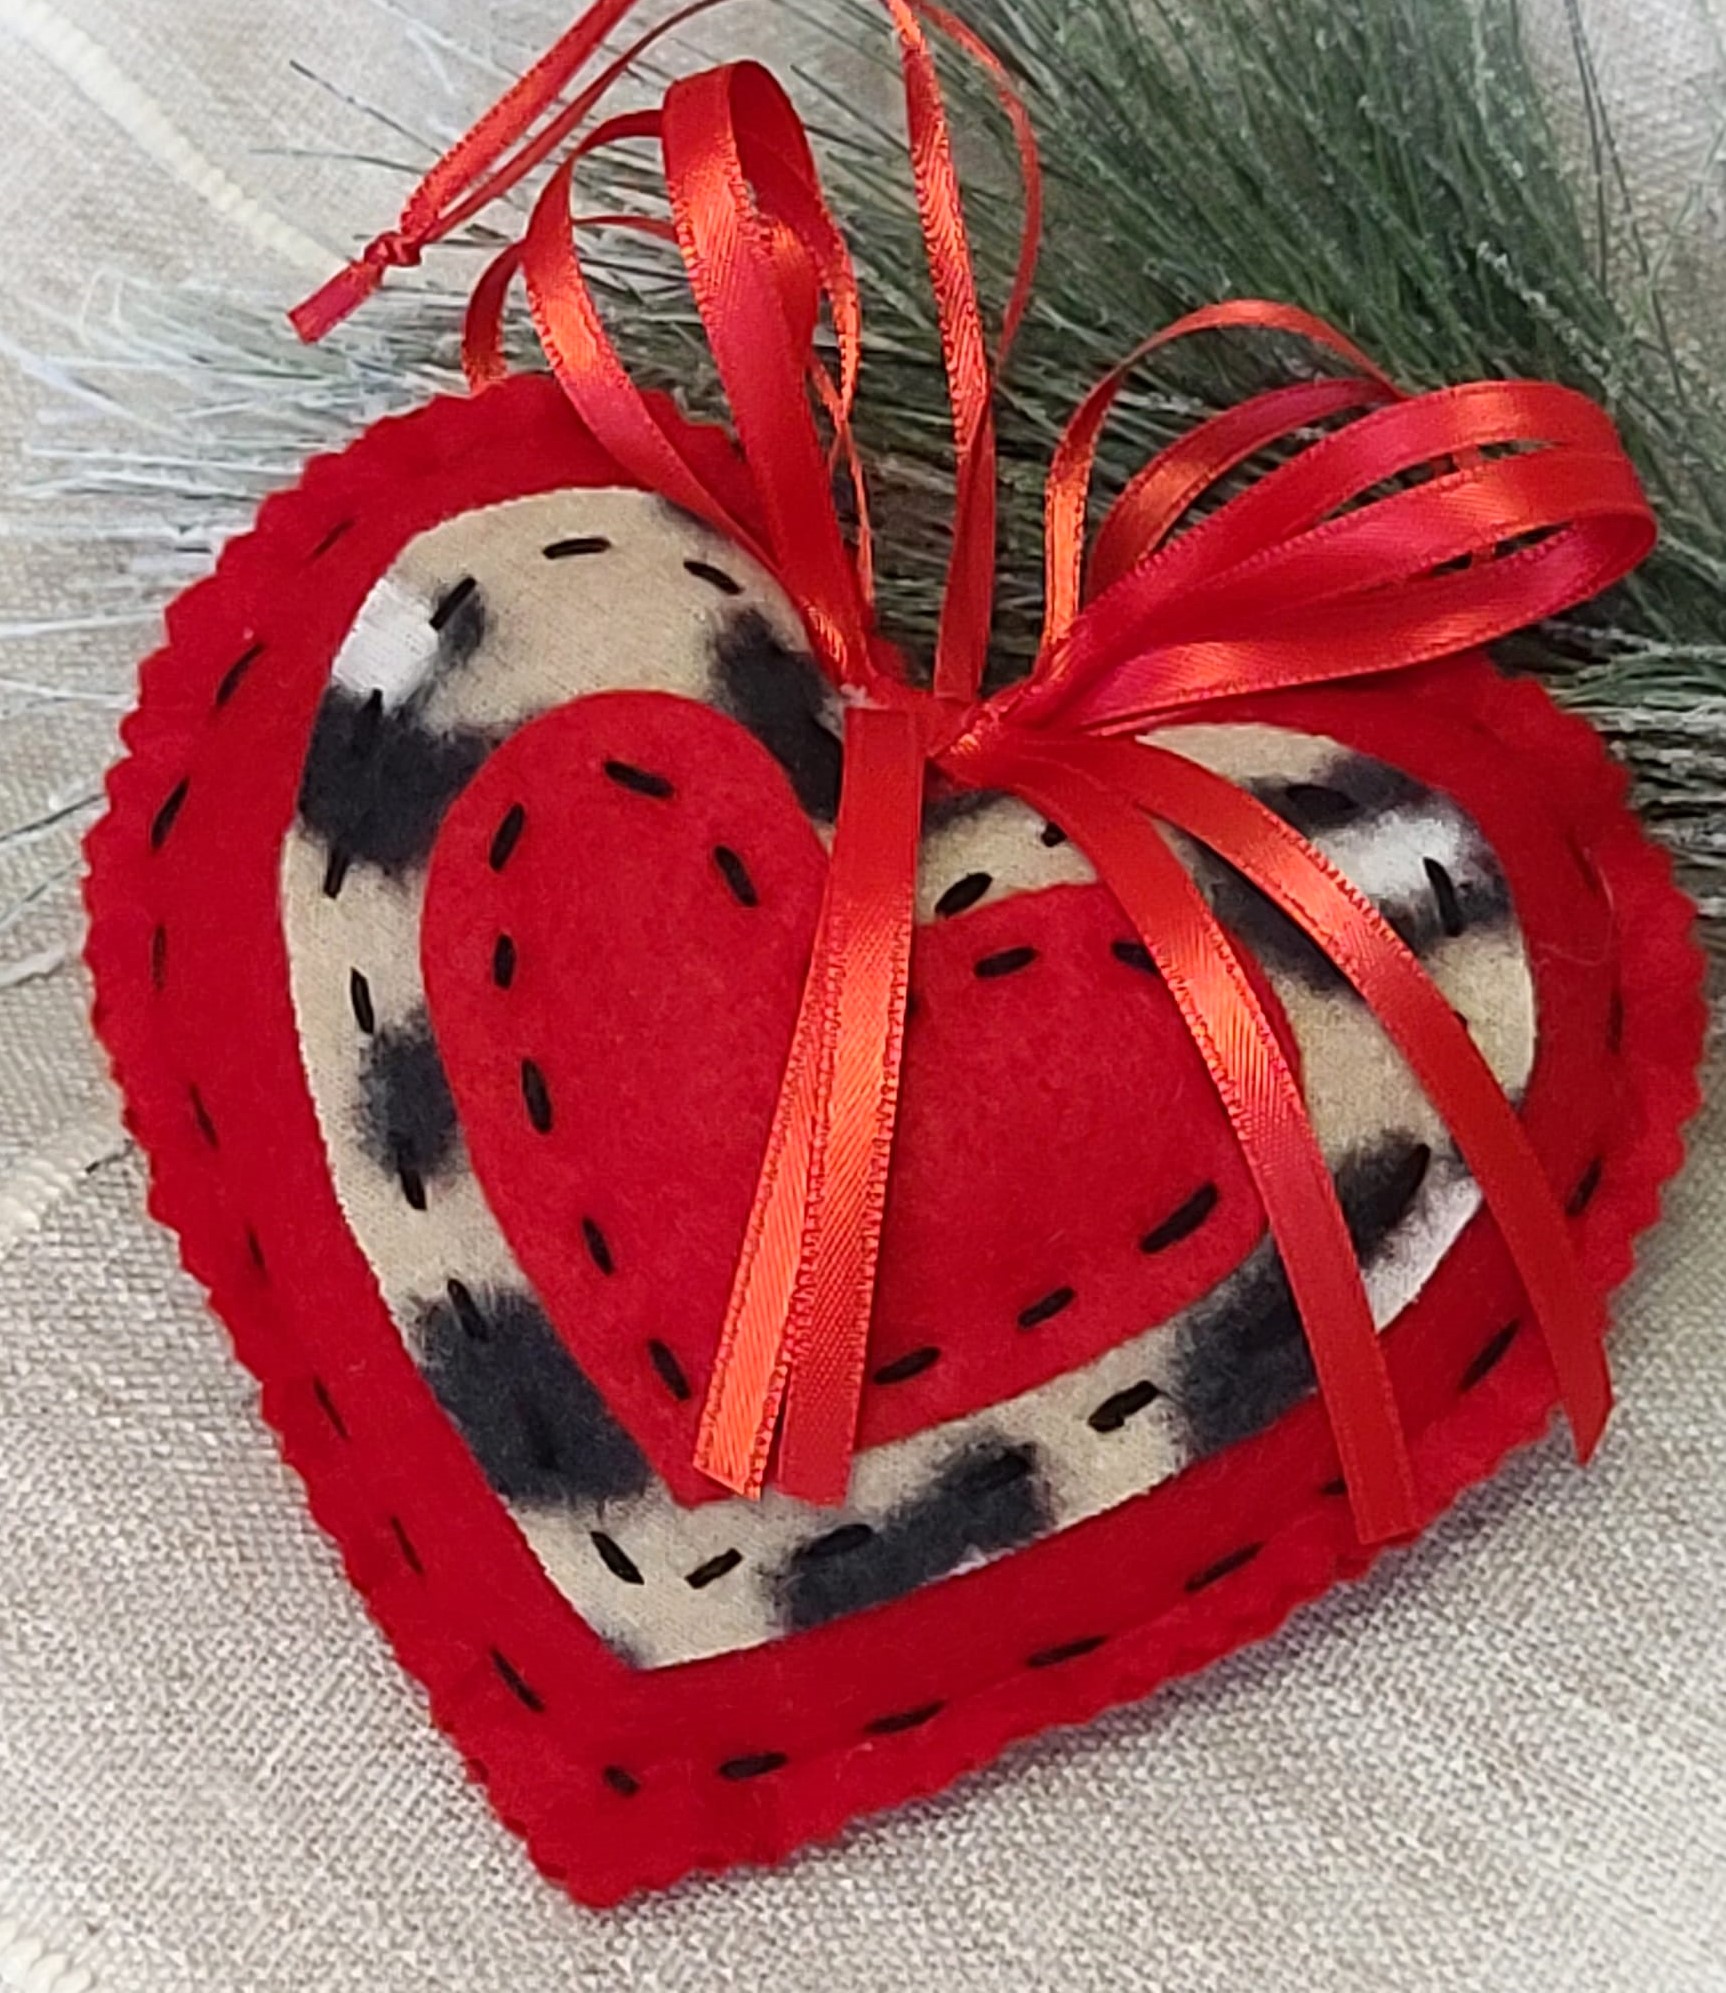 Leopard animal print and red heart ornament